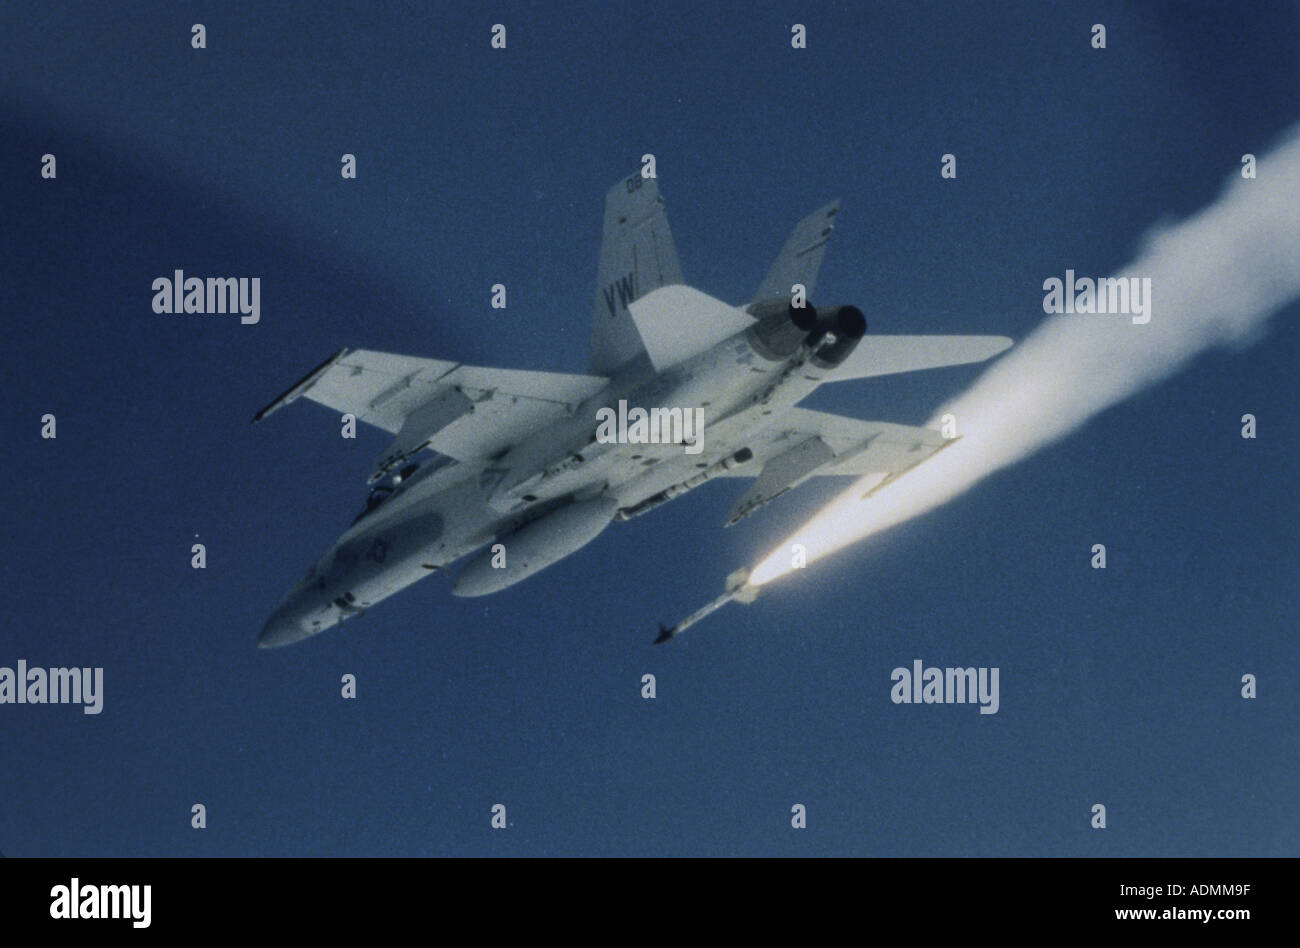 Low angle view of a fighter plane firing a missile Stock Photo